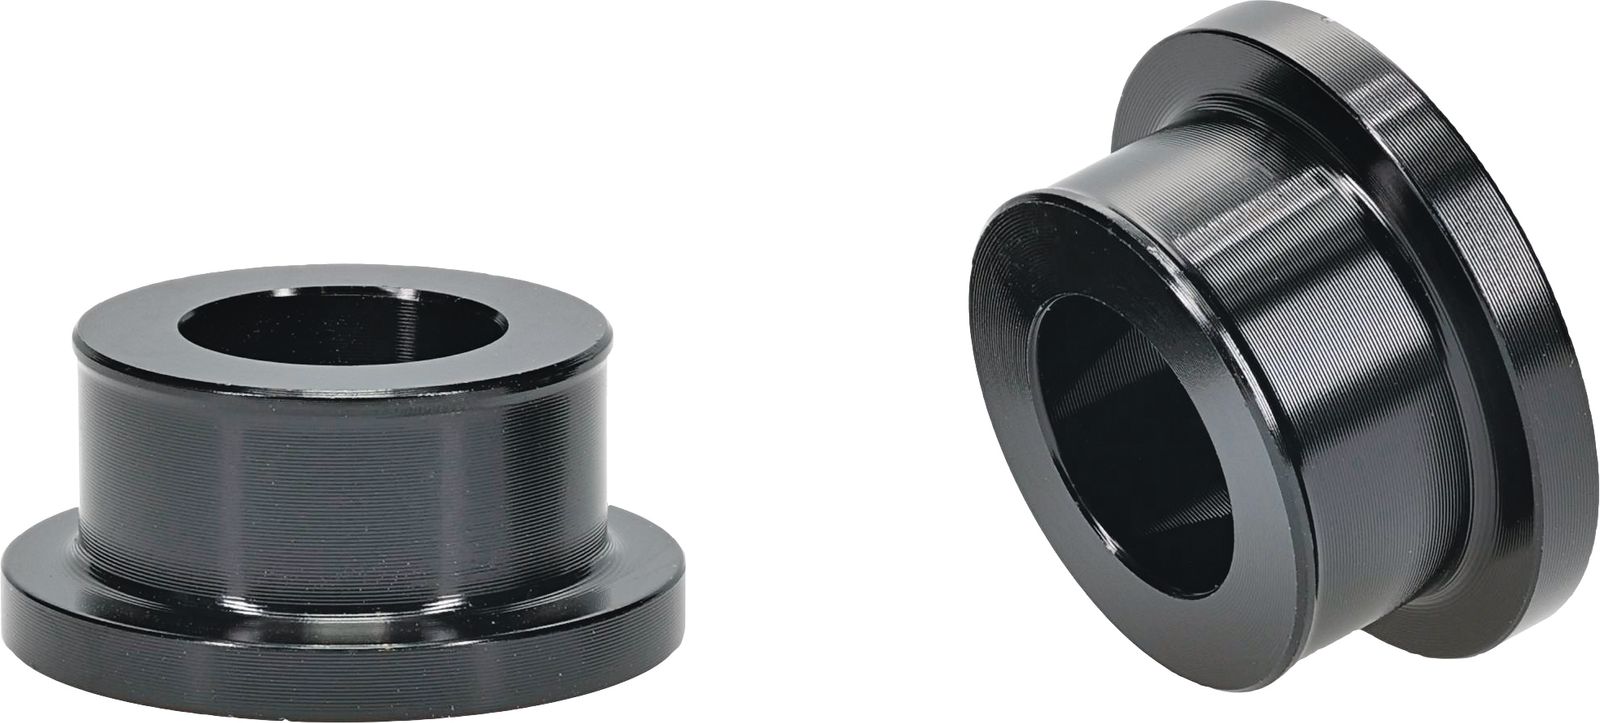 Wrp Front Wheel Spacer Kits - WRP111025 image